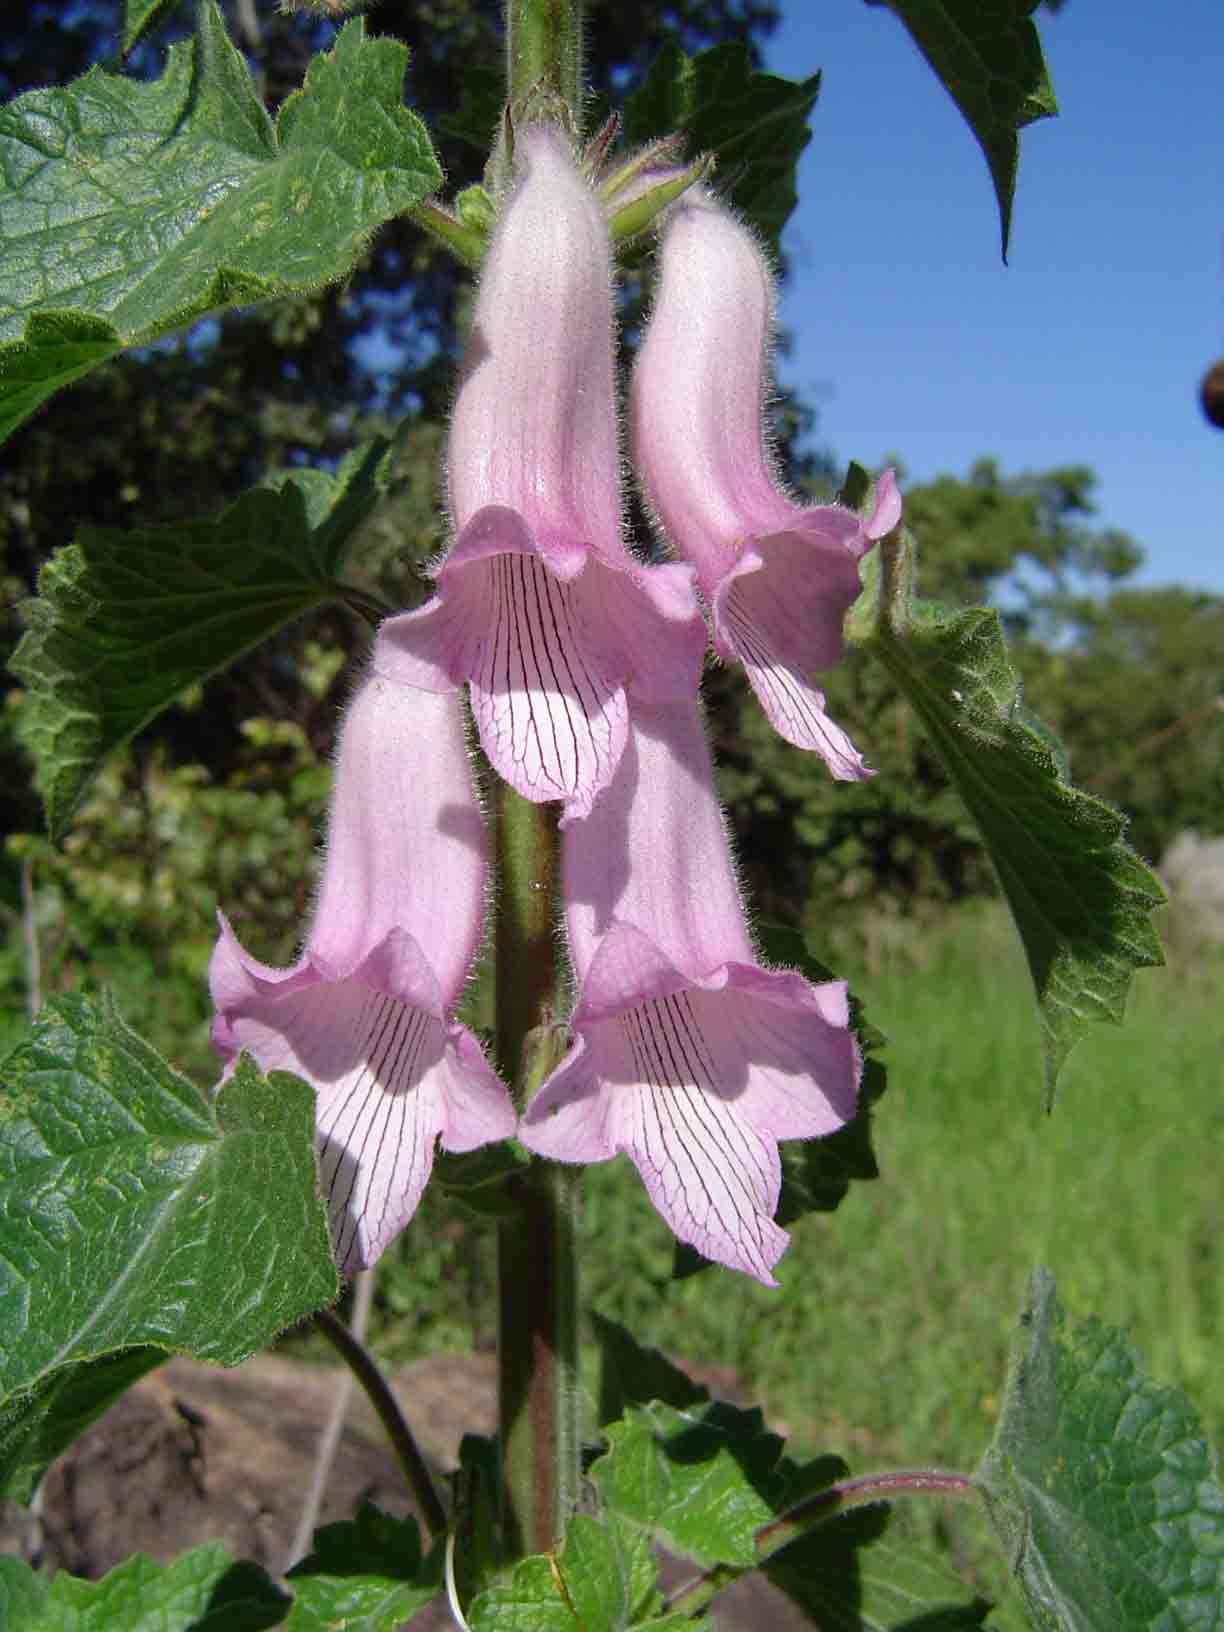 Image of African foxglove